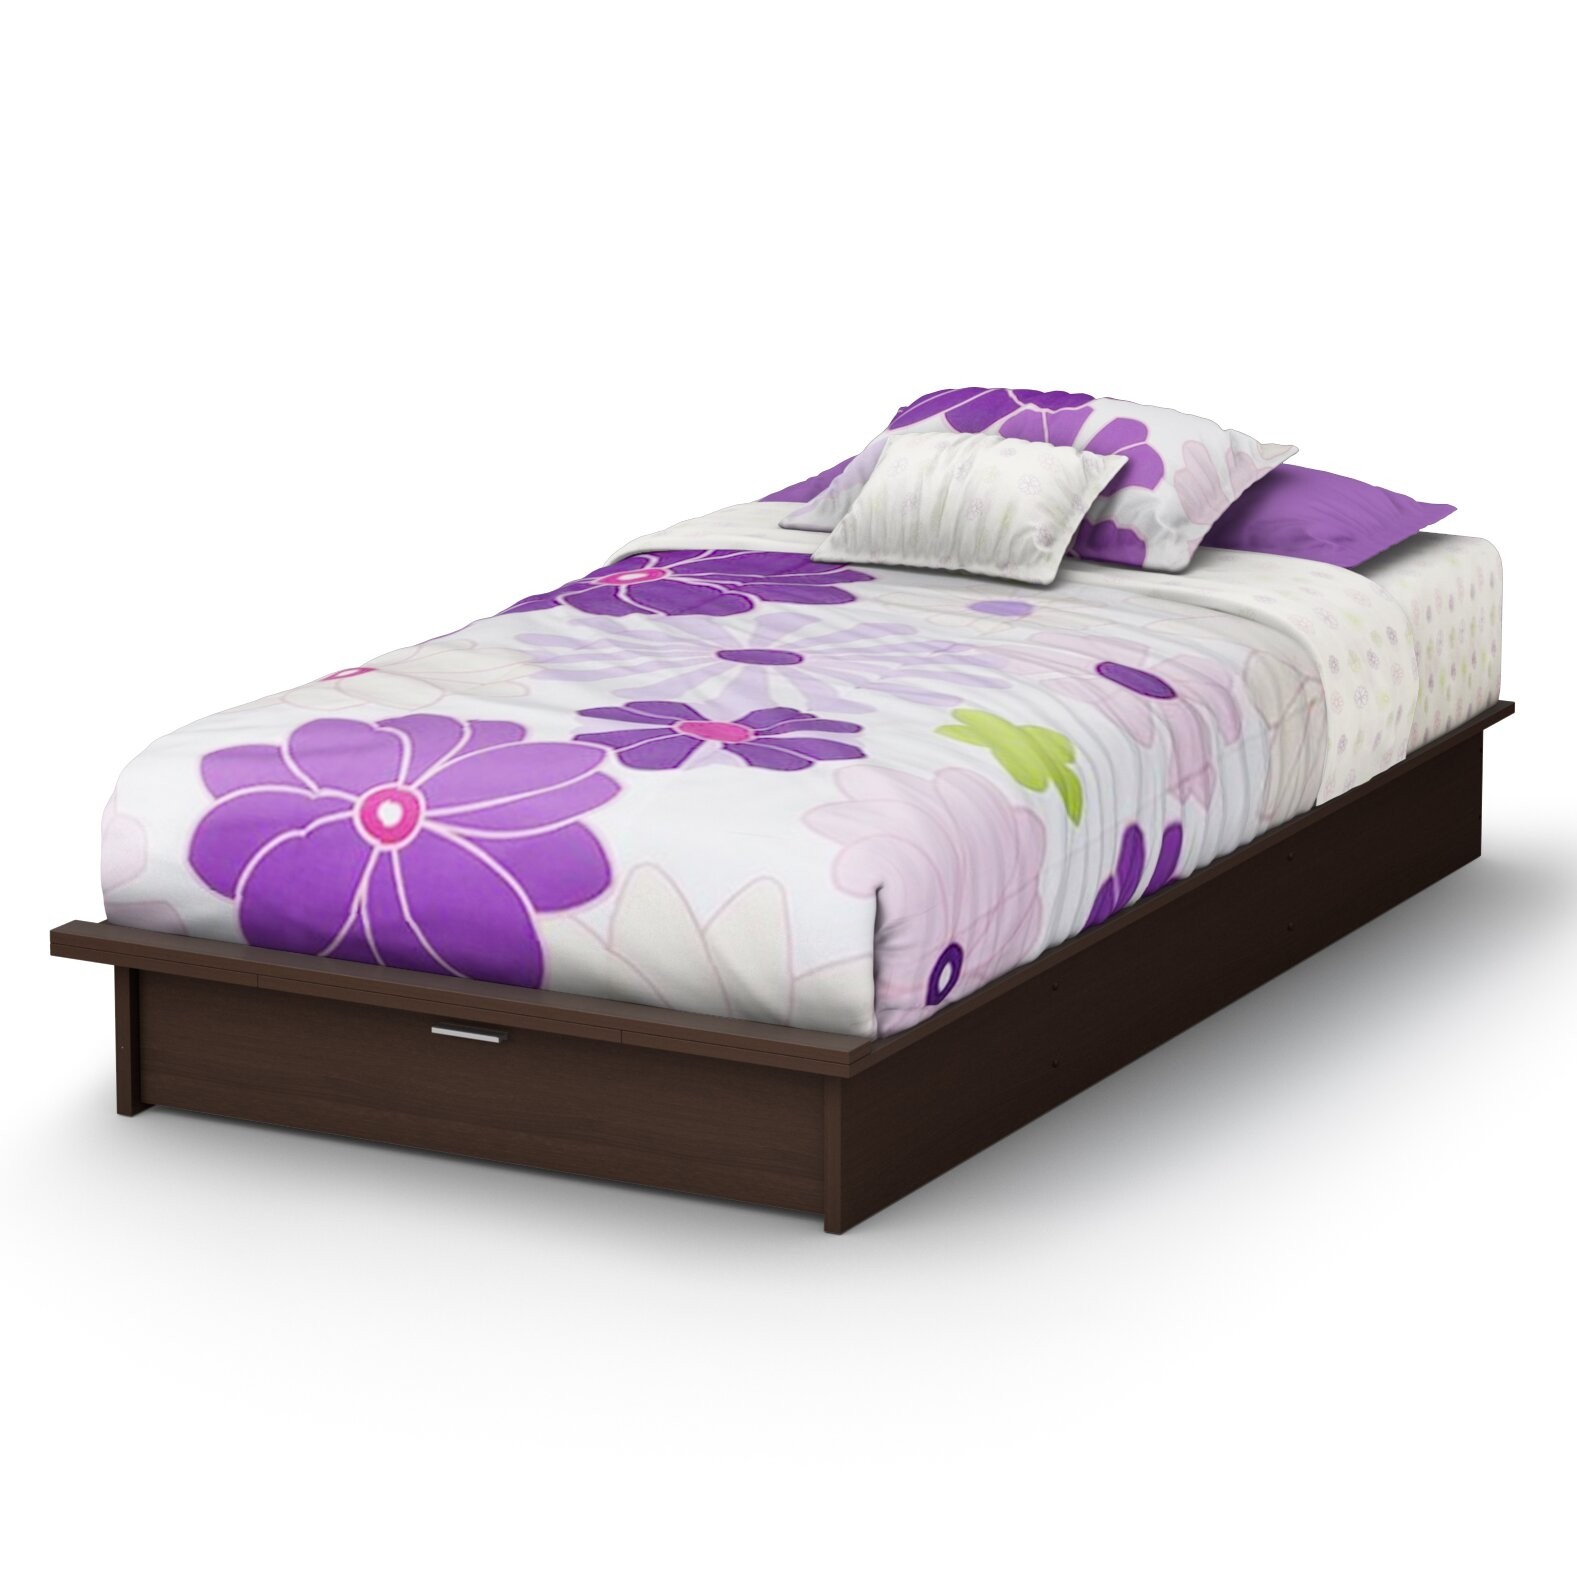 South shore step one twin platform bed with storage